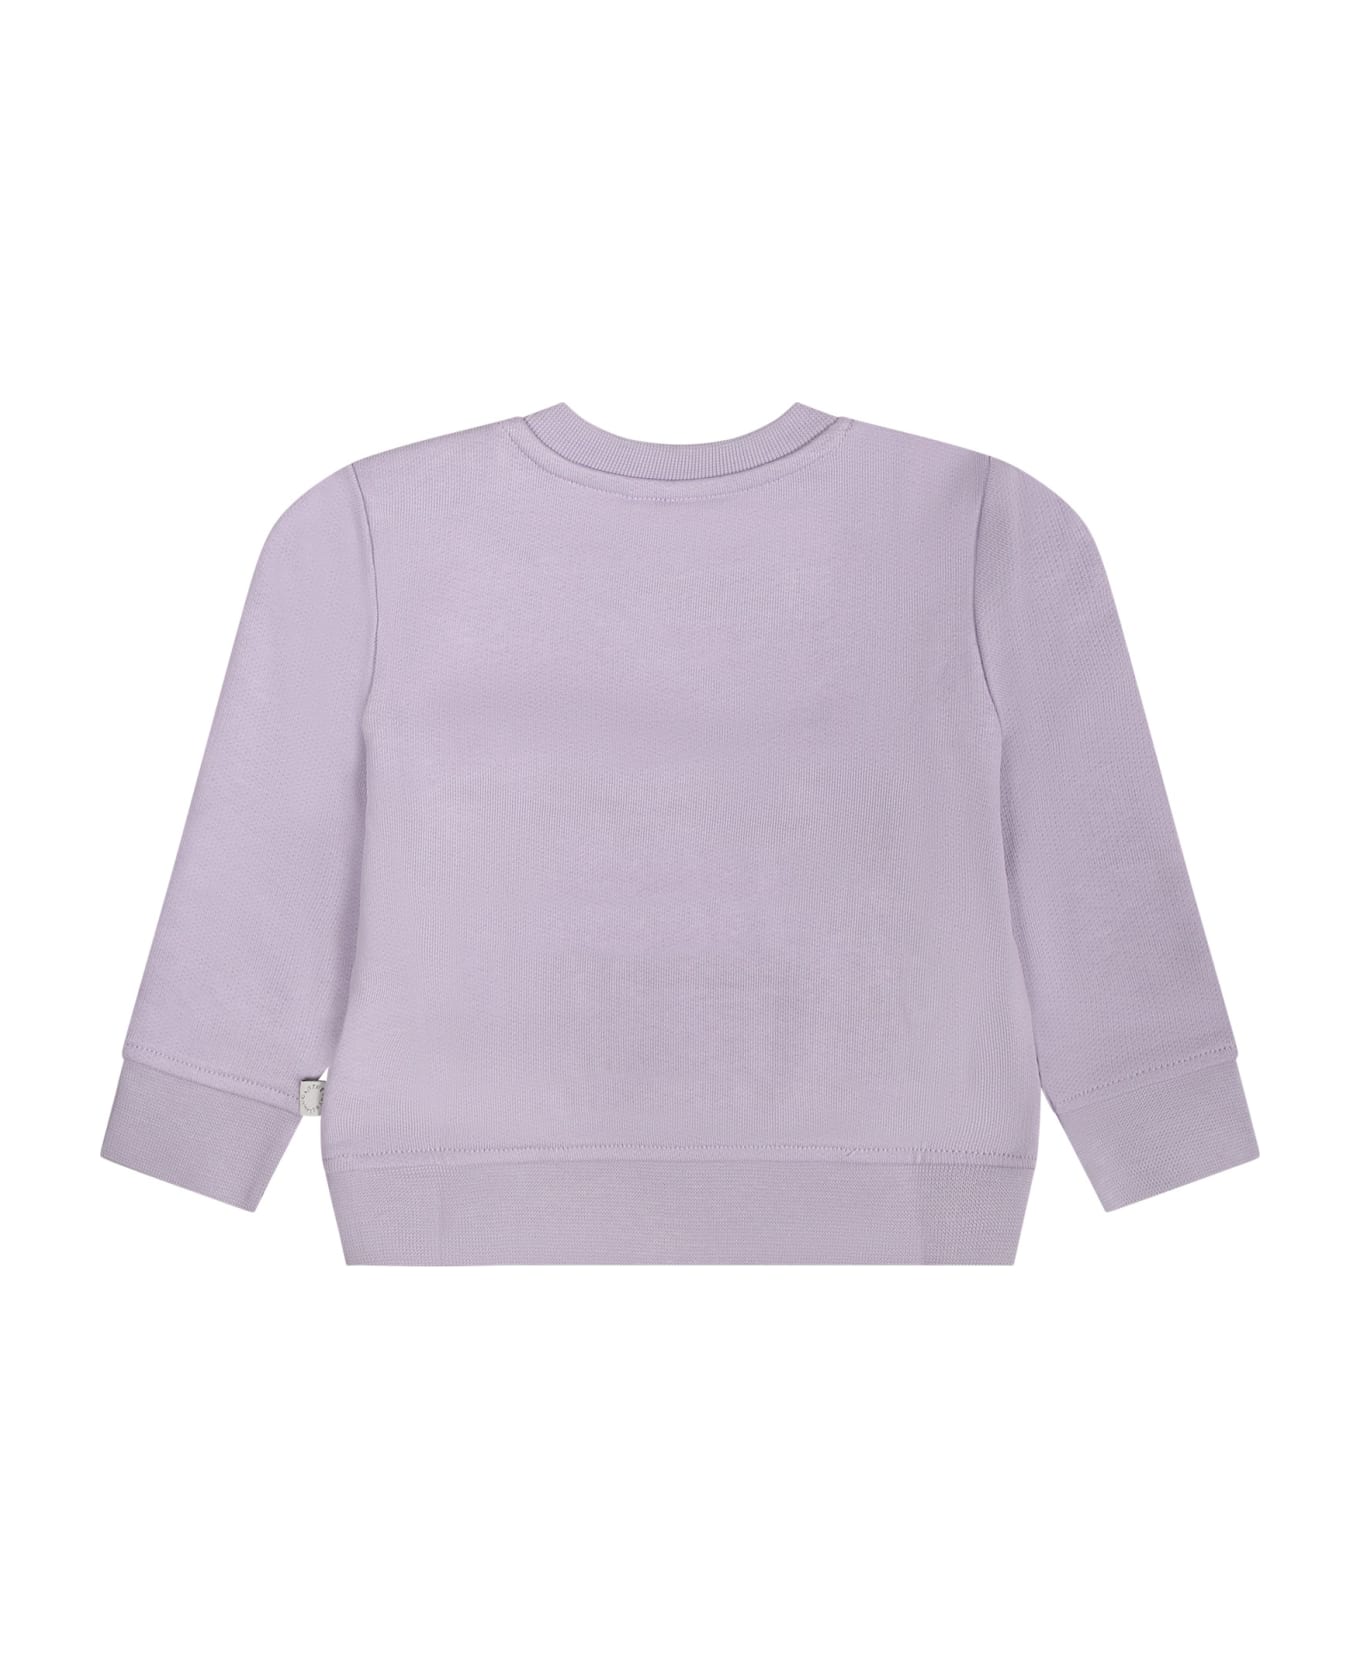 Stella McCartney Kids Purple Sweatshirt For Baby Girl With Smiley And Shells - Violet